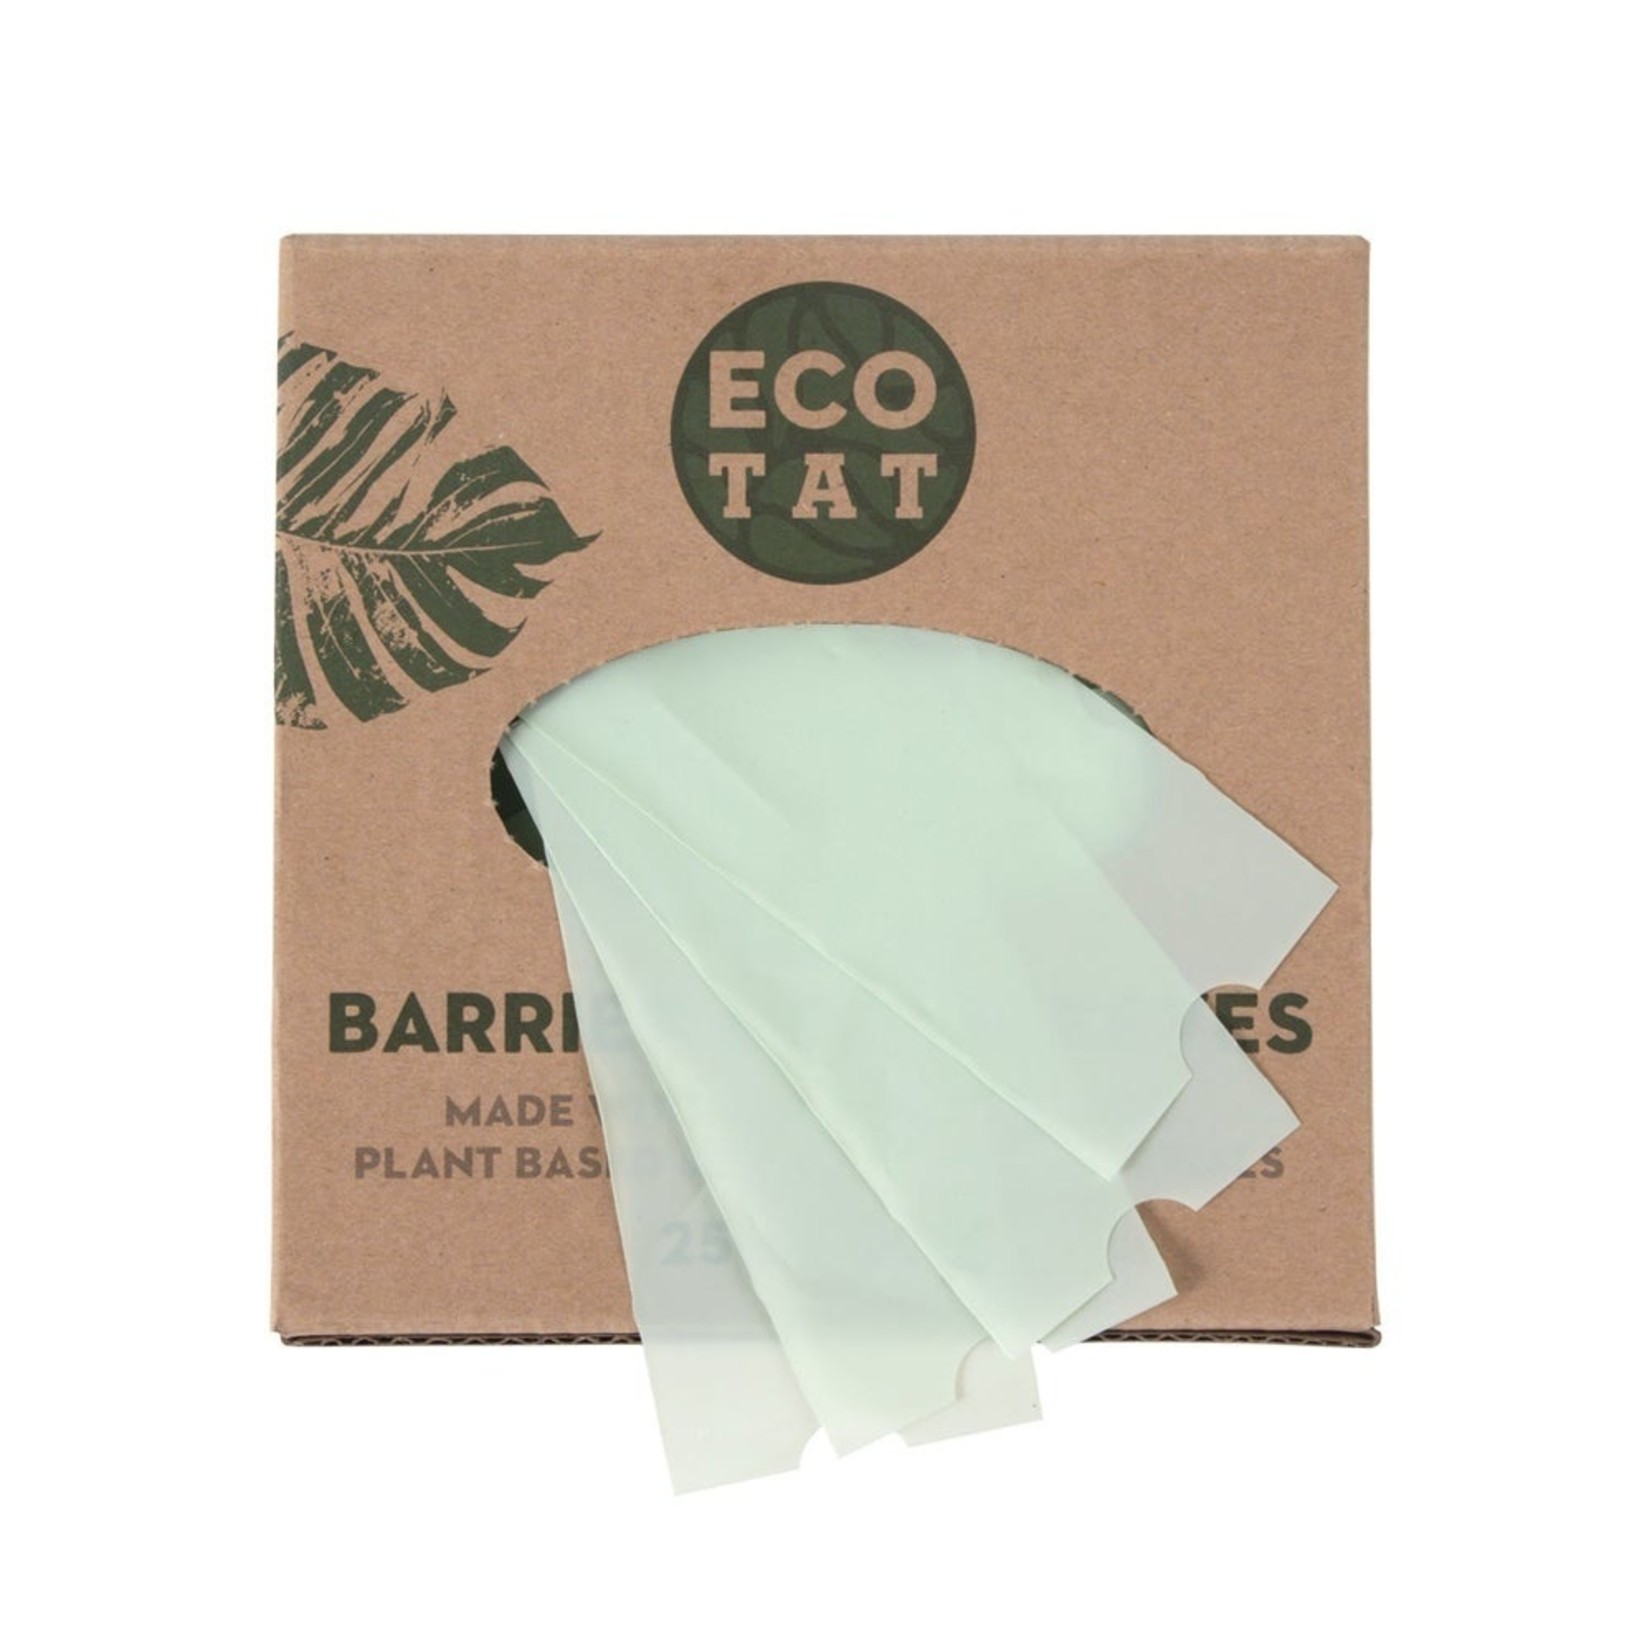 ECOTAT ECO TAT BARRIER GRIP SLEEVES - SELECT A SIZE